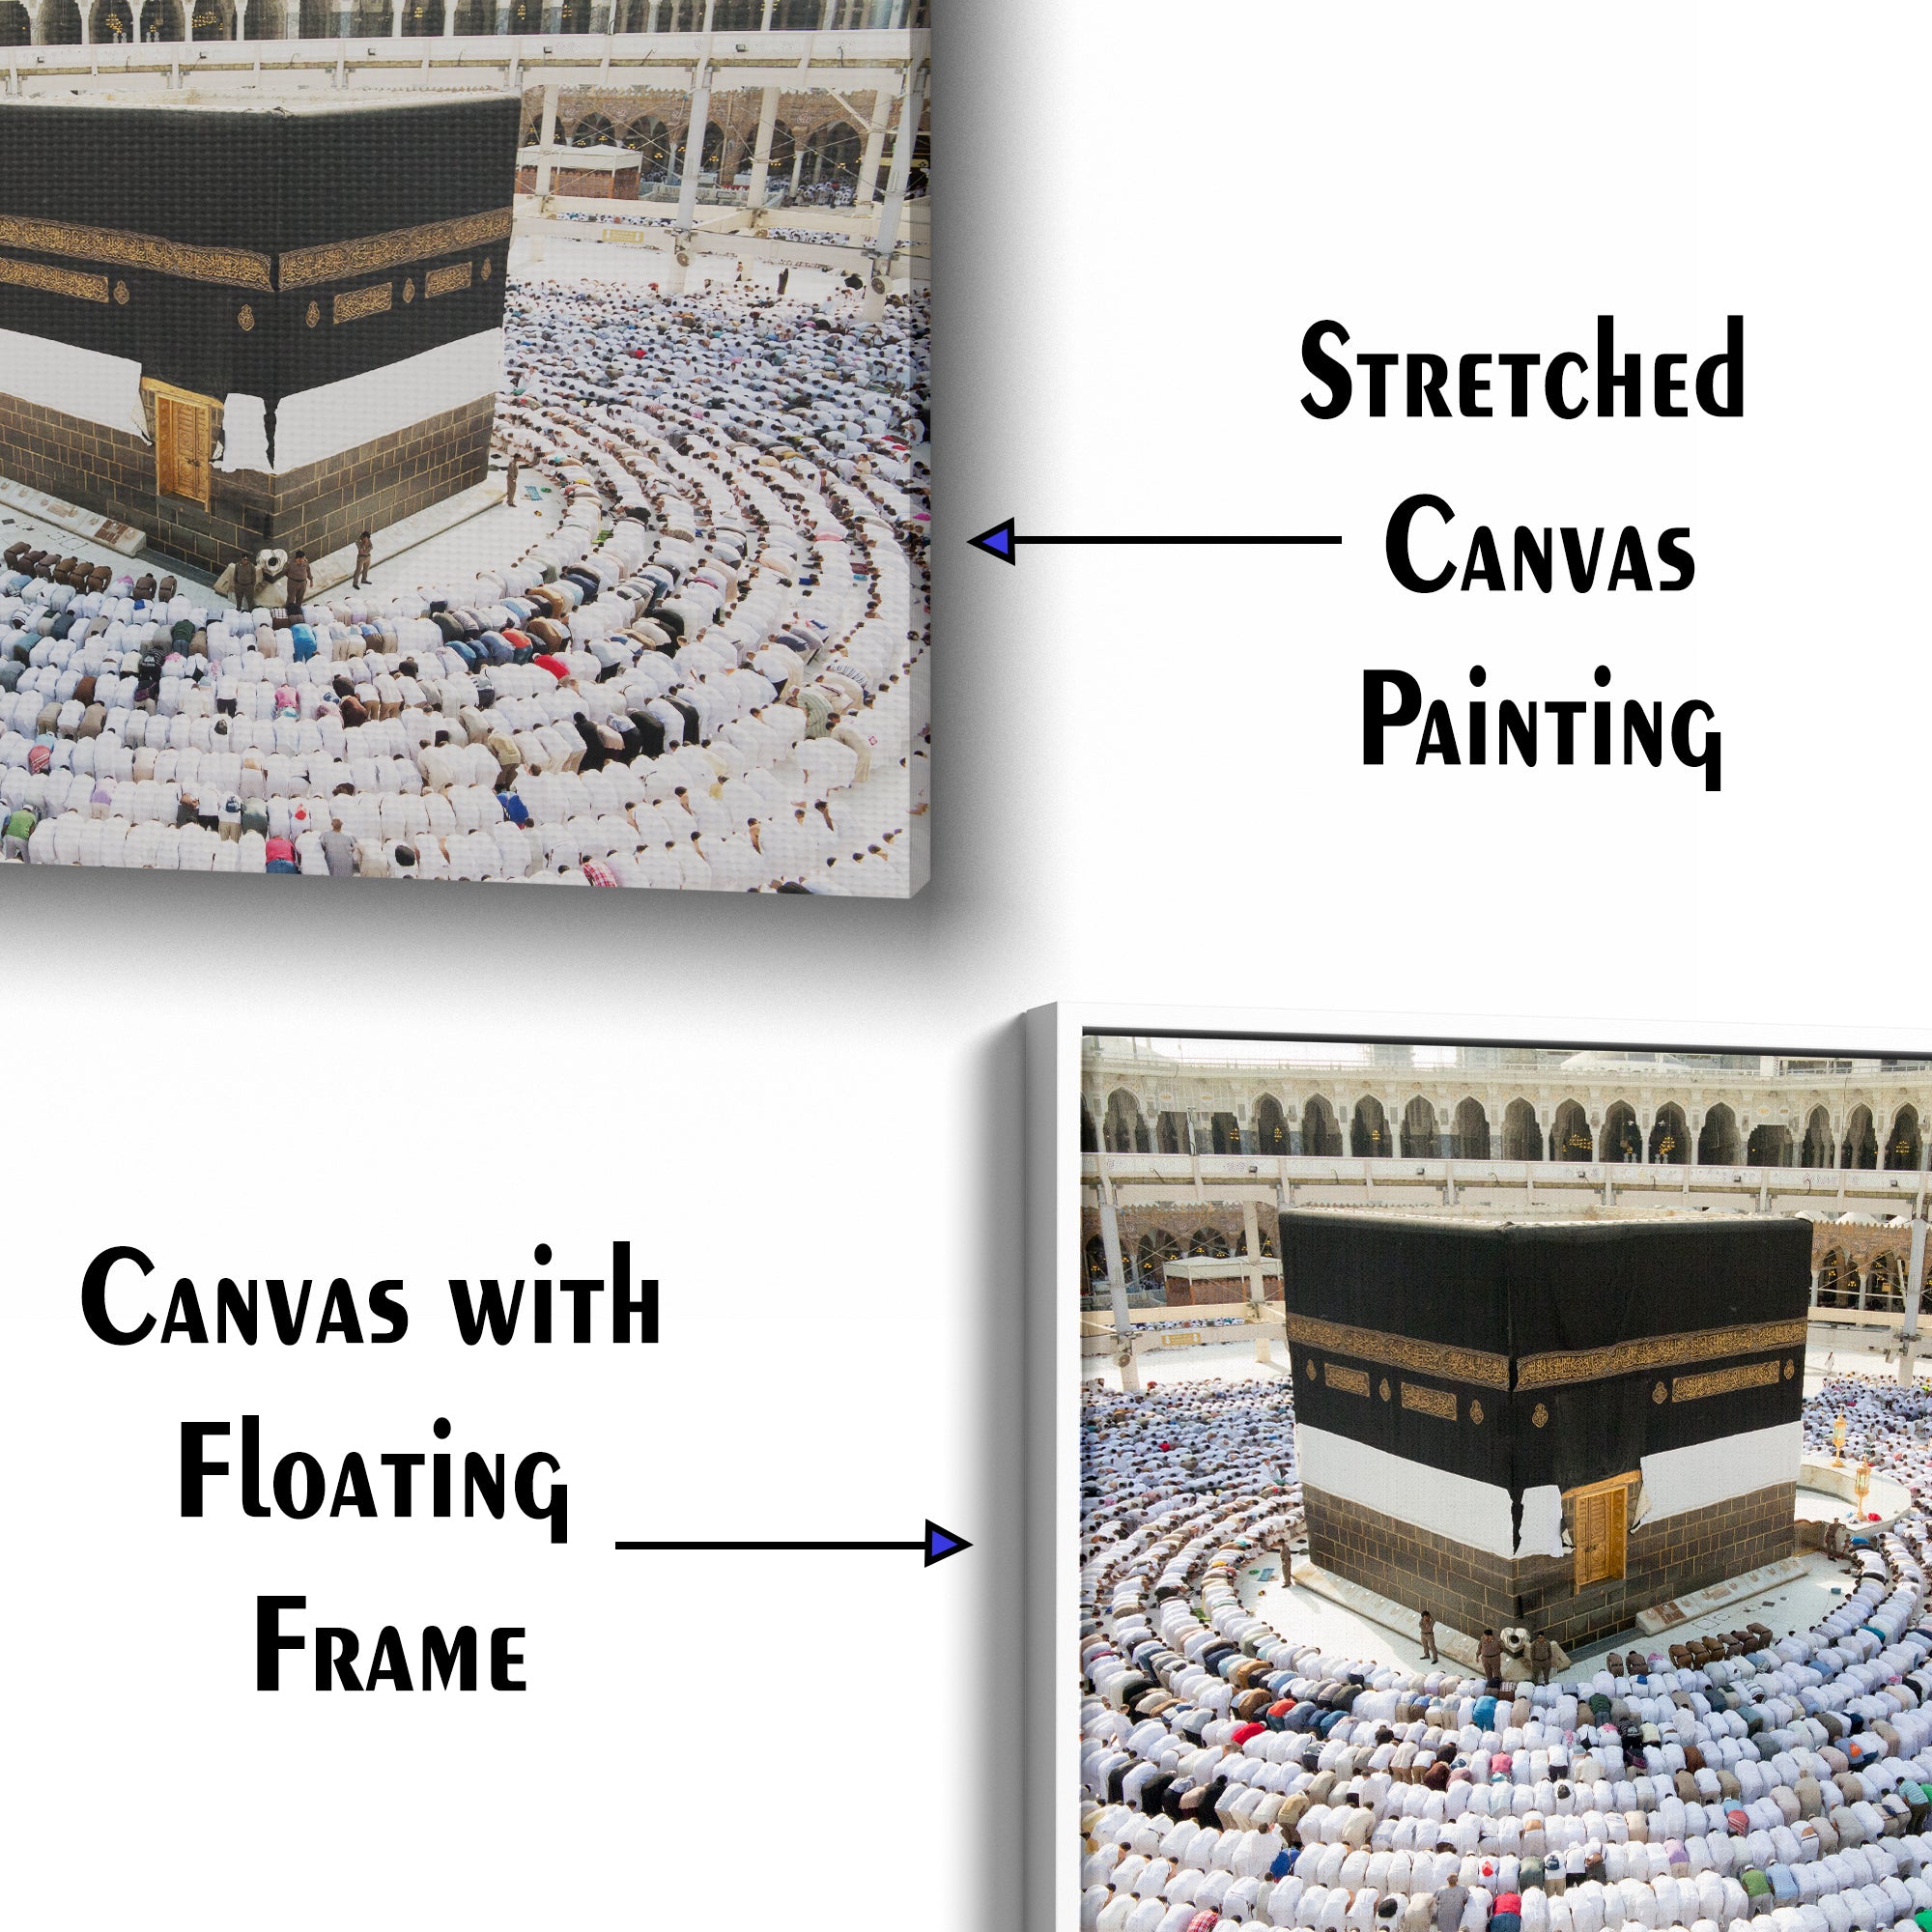 Kaaba Islamic Mosque Canvas Wall Painting